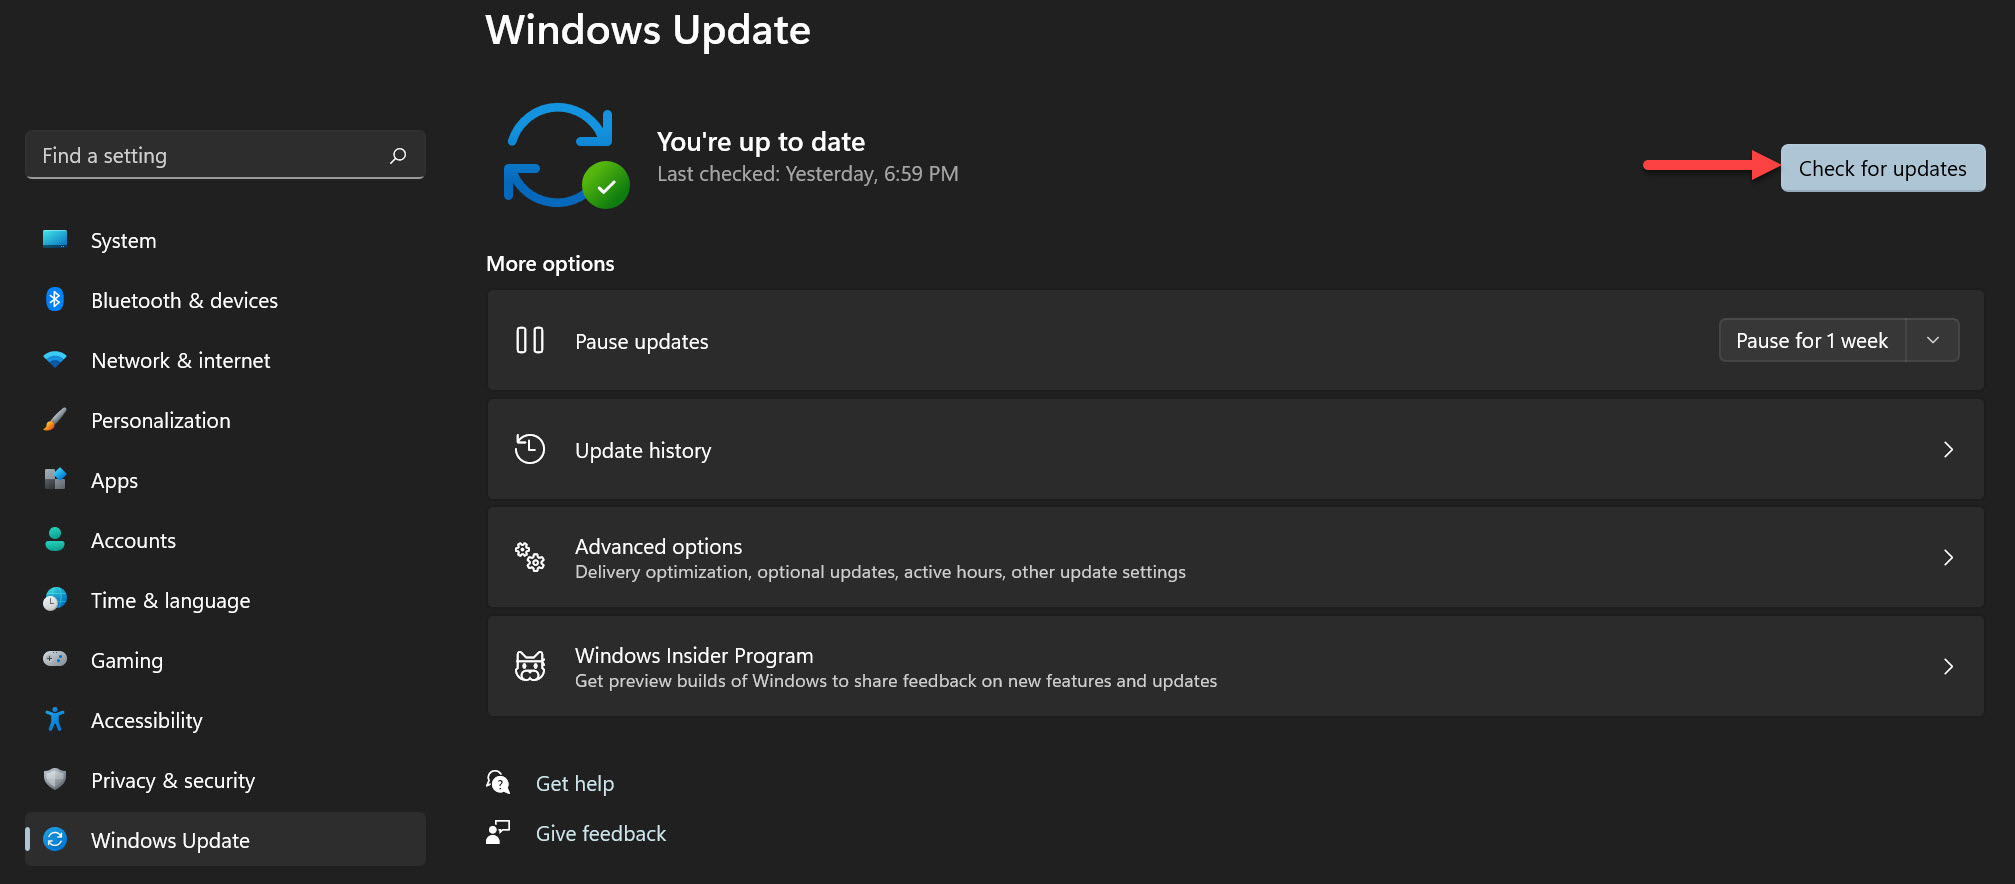 Update your Windows to latest build